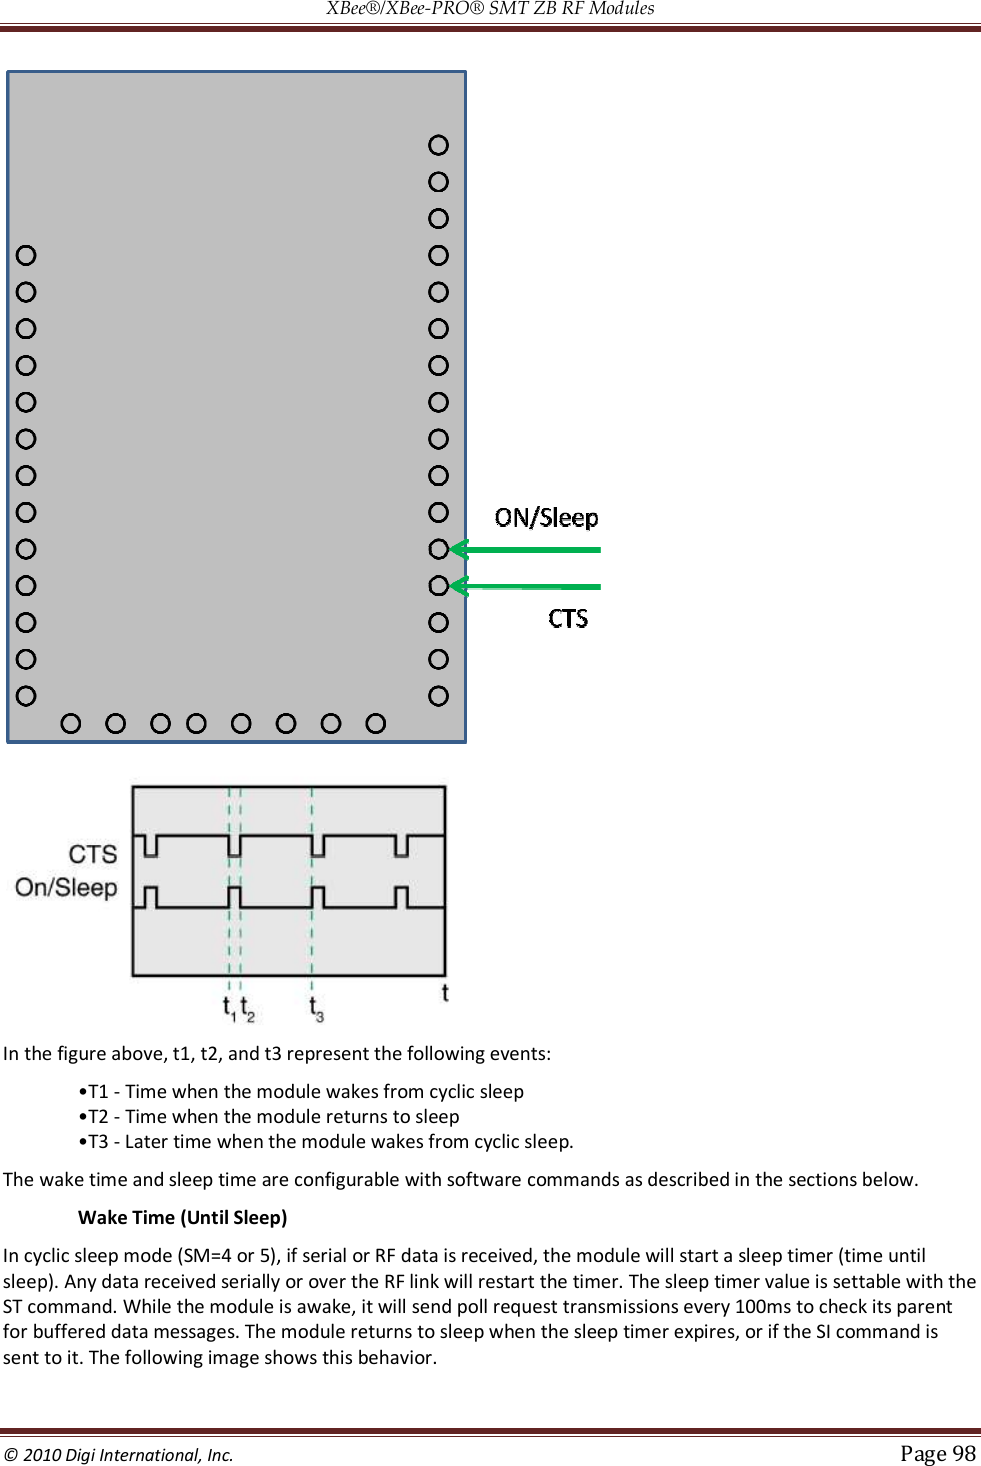 XBee®/XBee‐PRO® SMT ZB RF Modules  © 2010 Digi International, Inc.   Page 98    In the figure above, t1, t2, and t3 represent the following events: •T1 - Time when the module wakes from cyclic sleep  •T2 - Time when the module returns to sleep  •T3 - Later time when the module wakes from cyclic sleep. The wake time and sleep time are configurable with software commands as described in the sections below.   Wake Time (Until Sleep) In cyclic sleep mode (SM=4 or 5), if serial or RF data is received, the module will start a sleep timer (time until sleep). Any data received serially or over the RF link will restart the timer. The sleep timer value is settable with the ST command. While the module is awake, it will send poll request transmissions every 100ms to check its parent for buffered data messages. The module returns to sleep when the sleep timer expires, or if the SI command is sent to it. The following image shows this behavior. 